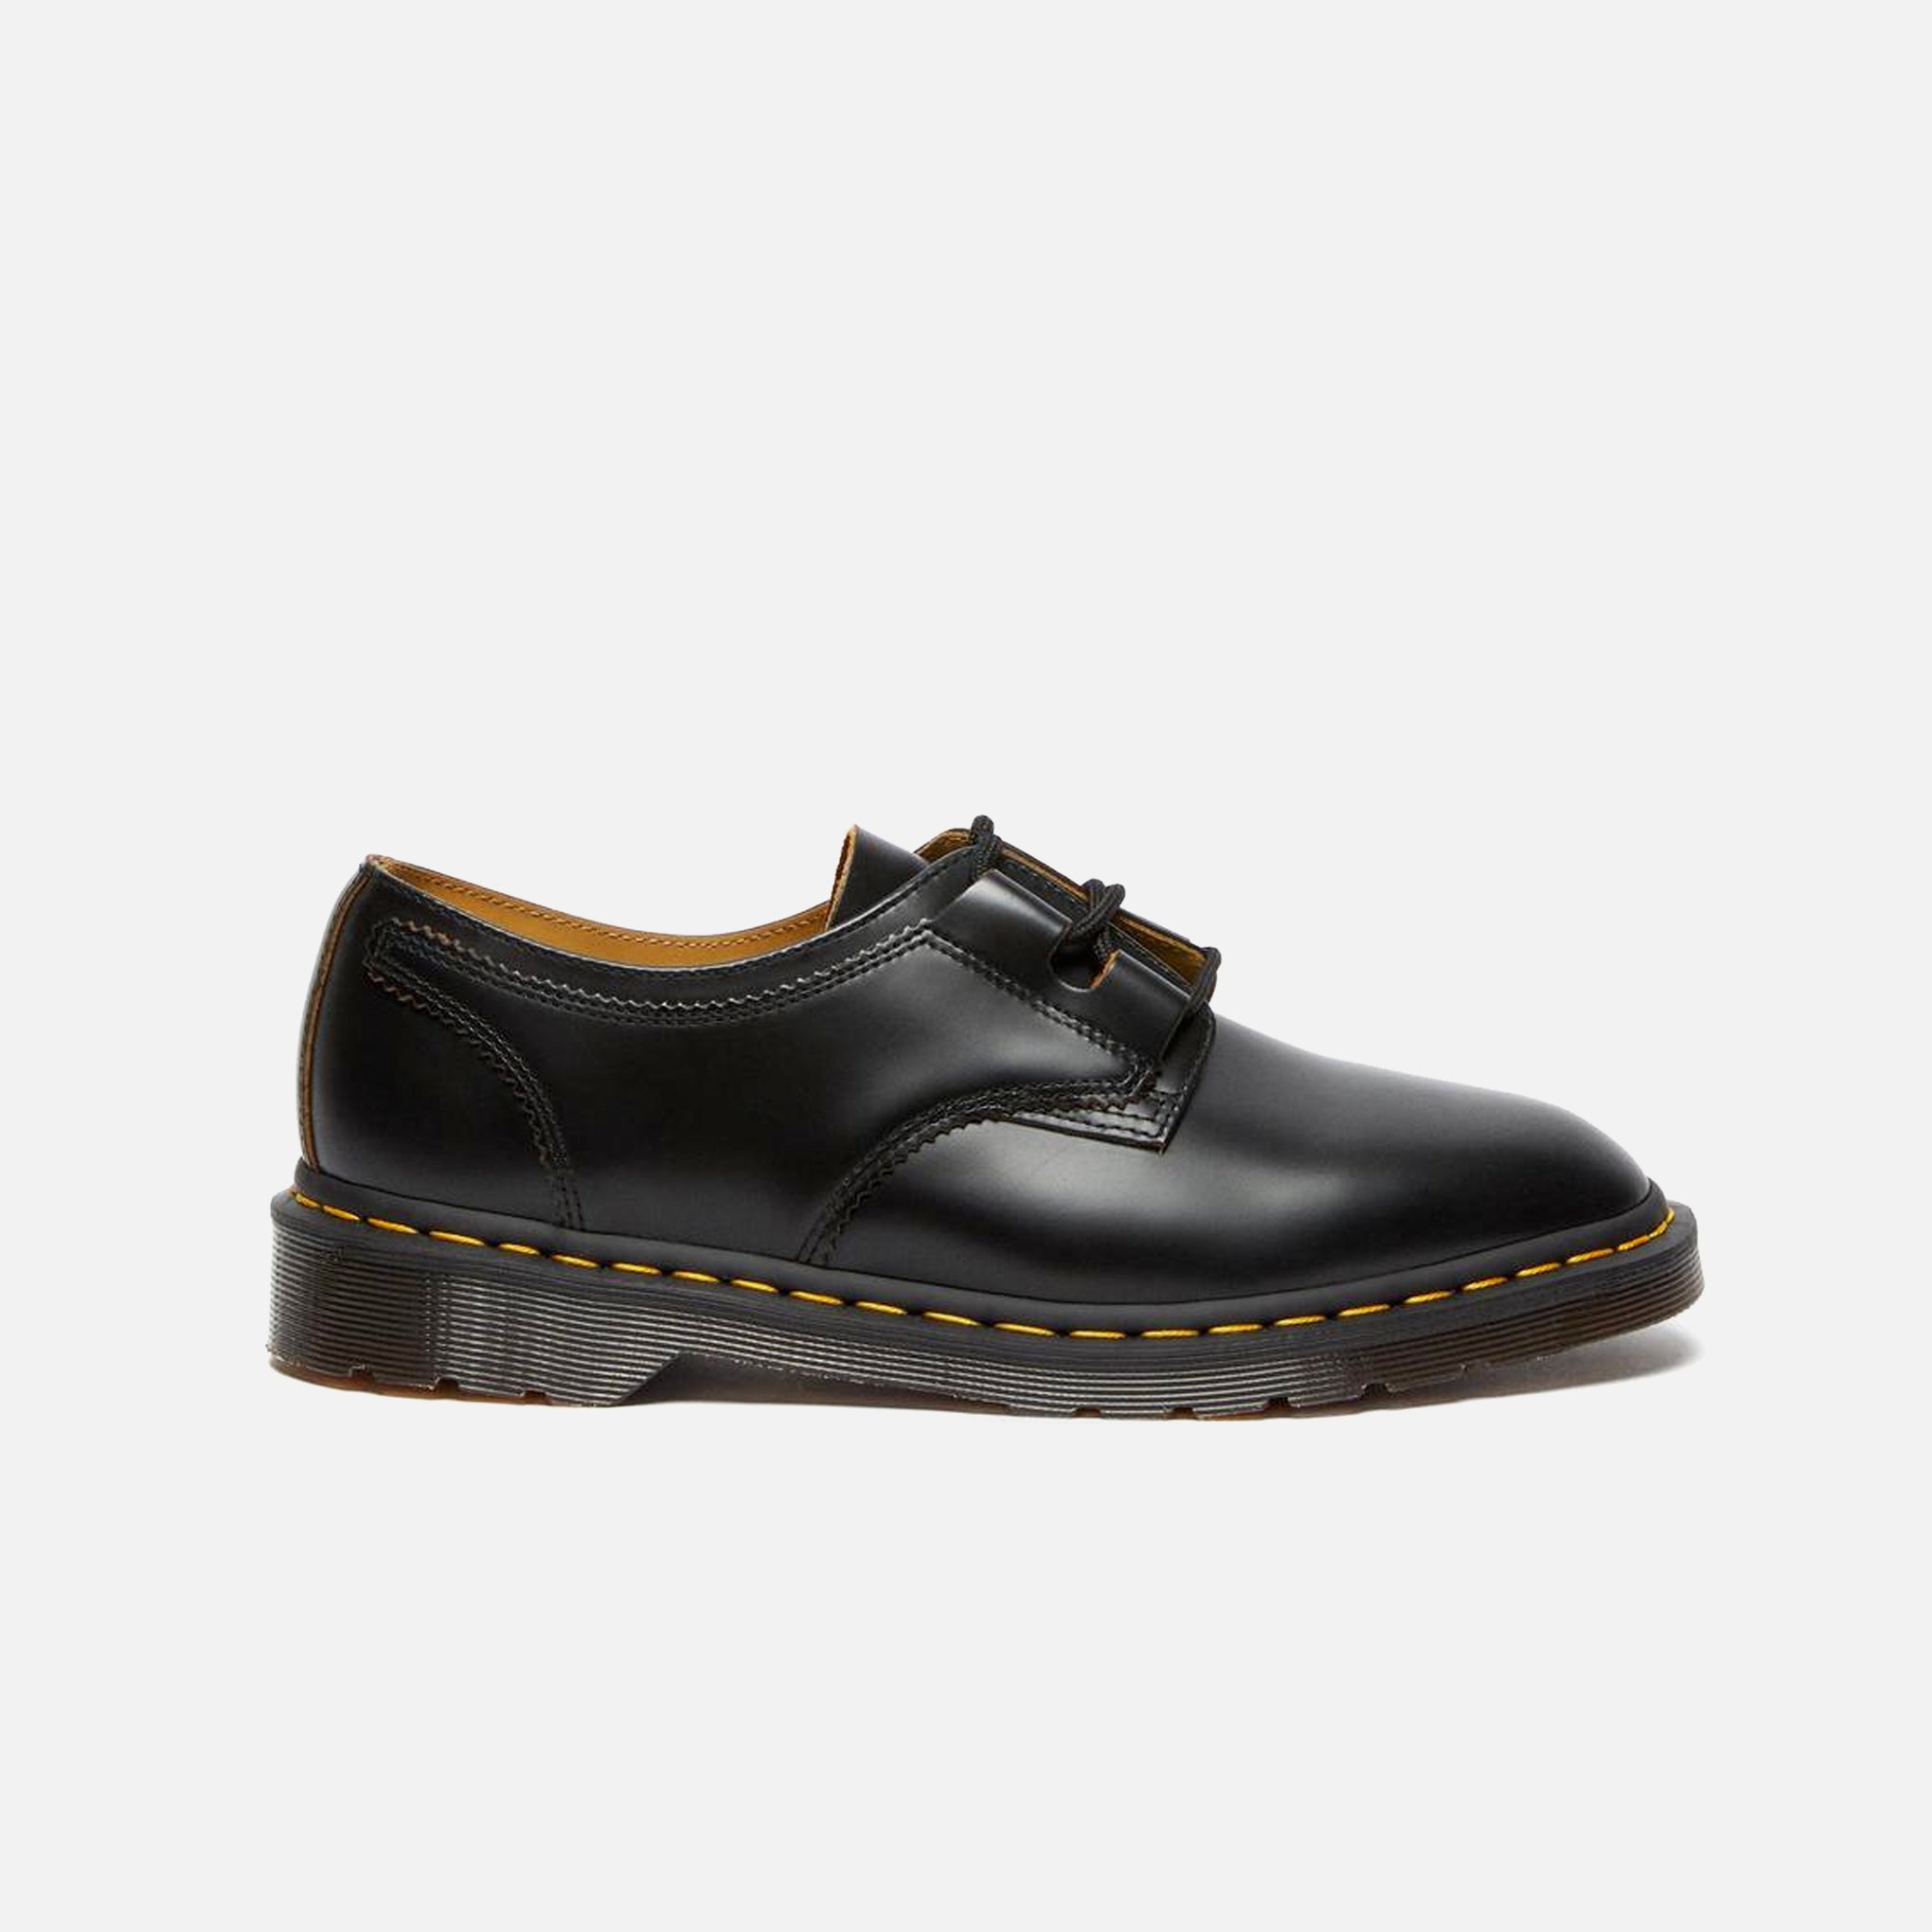 Dr. Martens® US Official: Up To 40% Off Select Styles